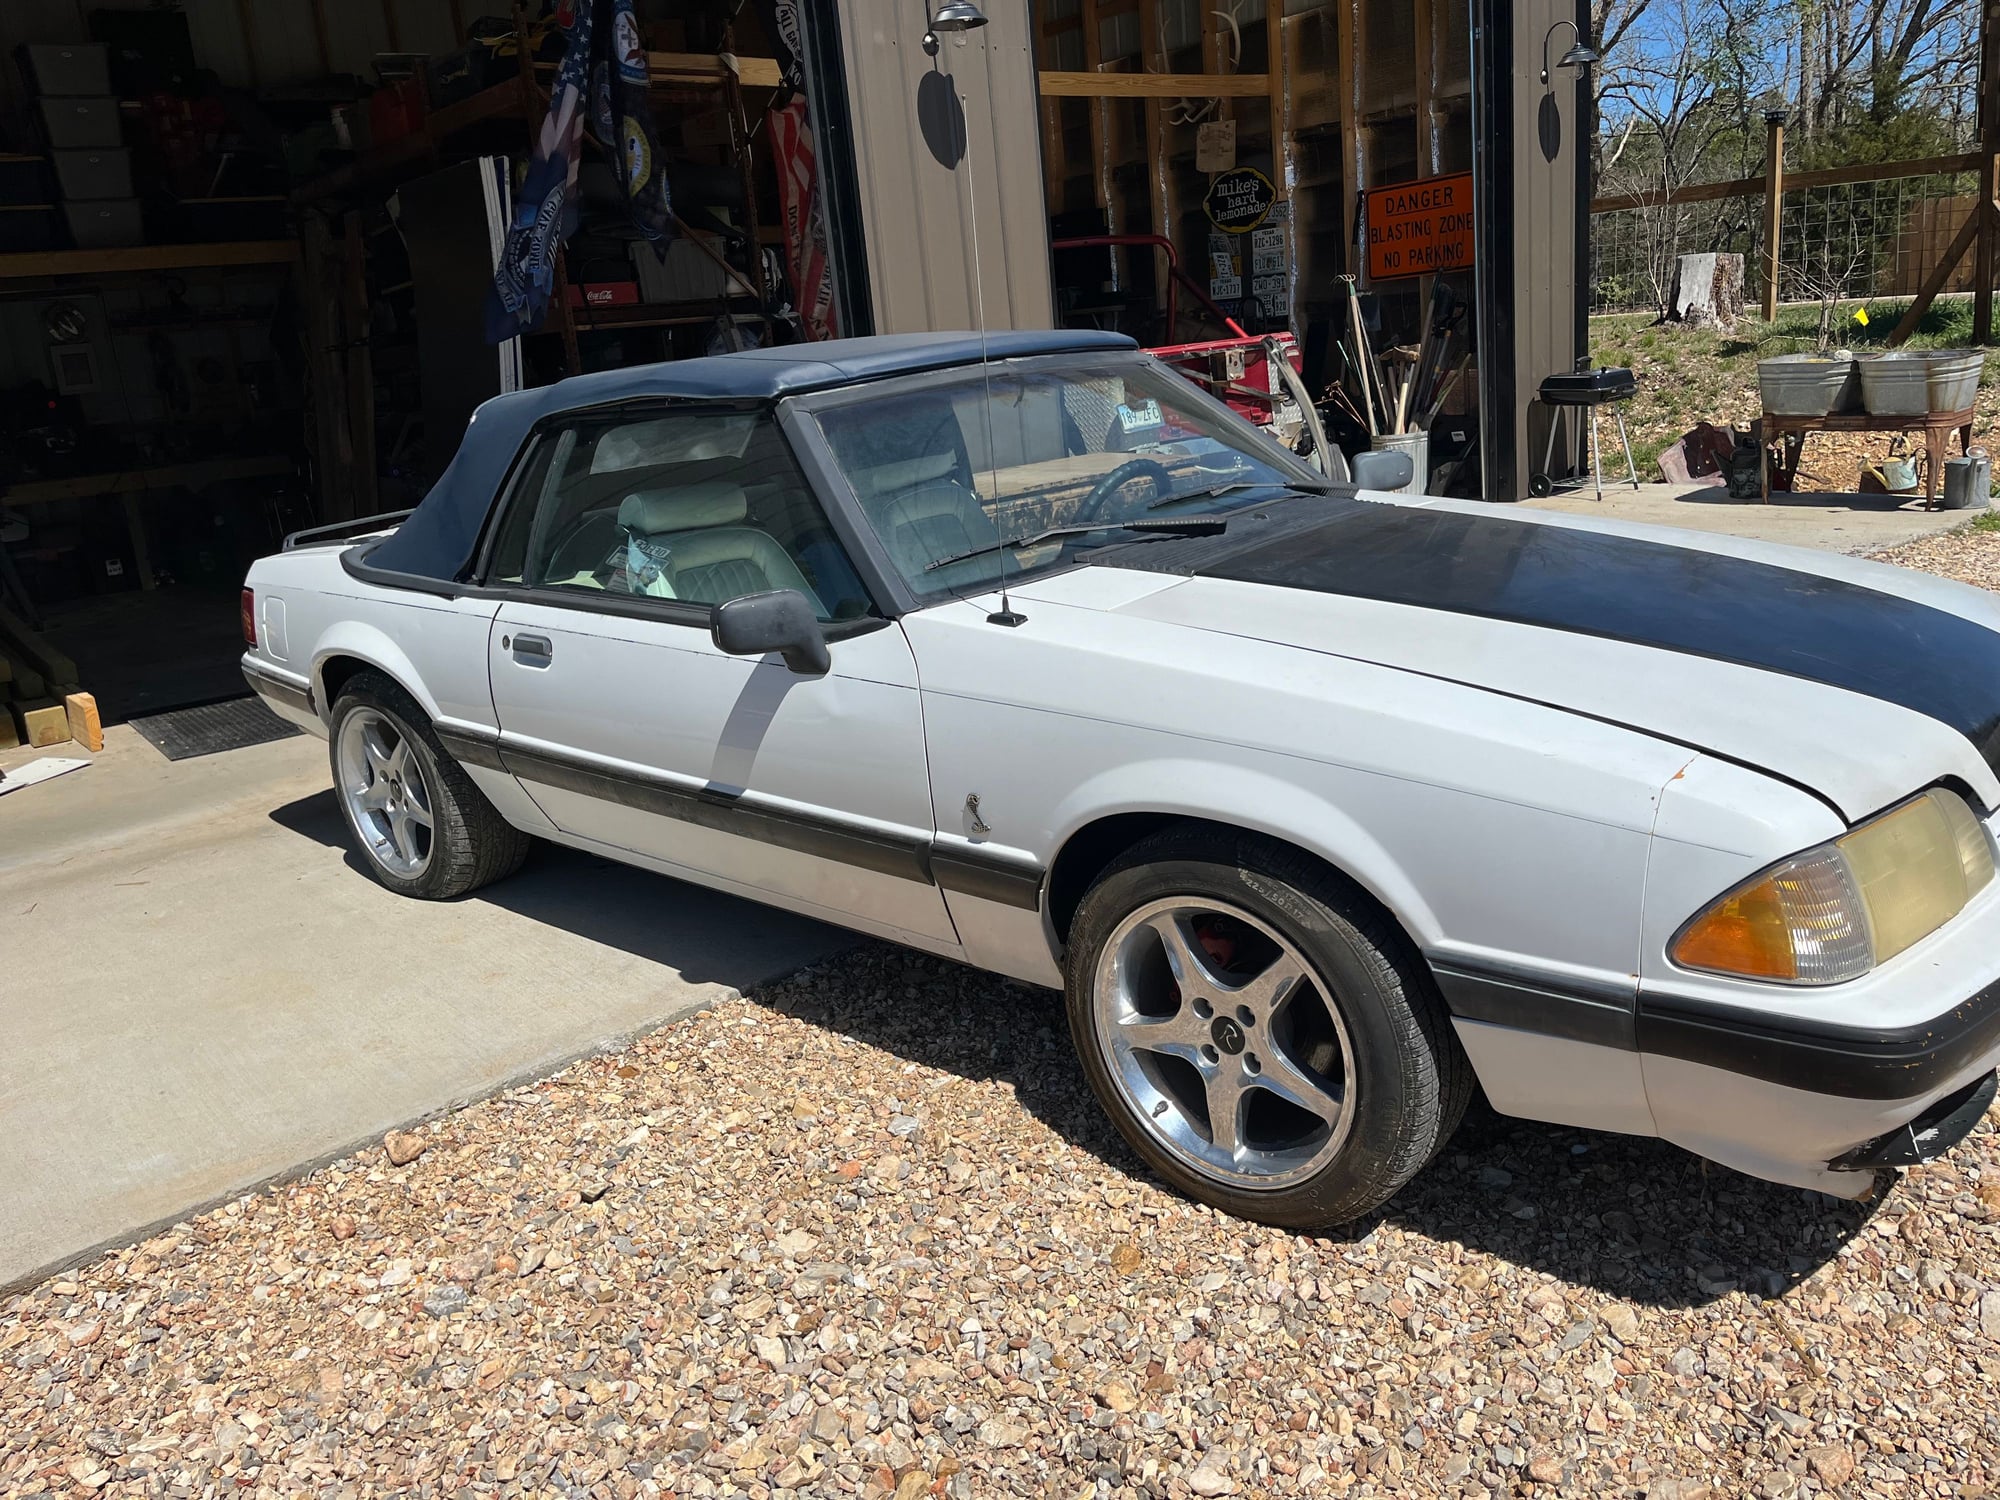 1990 Ford Mustang - 1990 Ford Mustang GT convertible - Used - VIN 1FACP44E1LF225265 - 25,000 Miles - 8 cyl - 2WD - Automatic - Convertible - White - Eureka Springs, AR 72632, United States